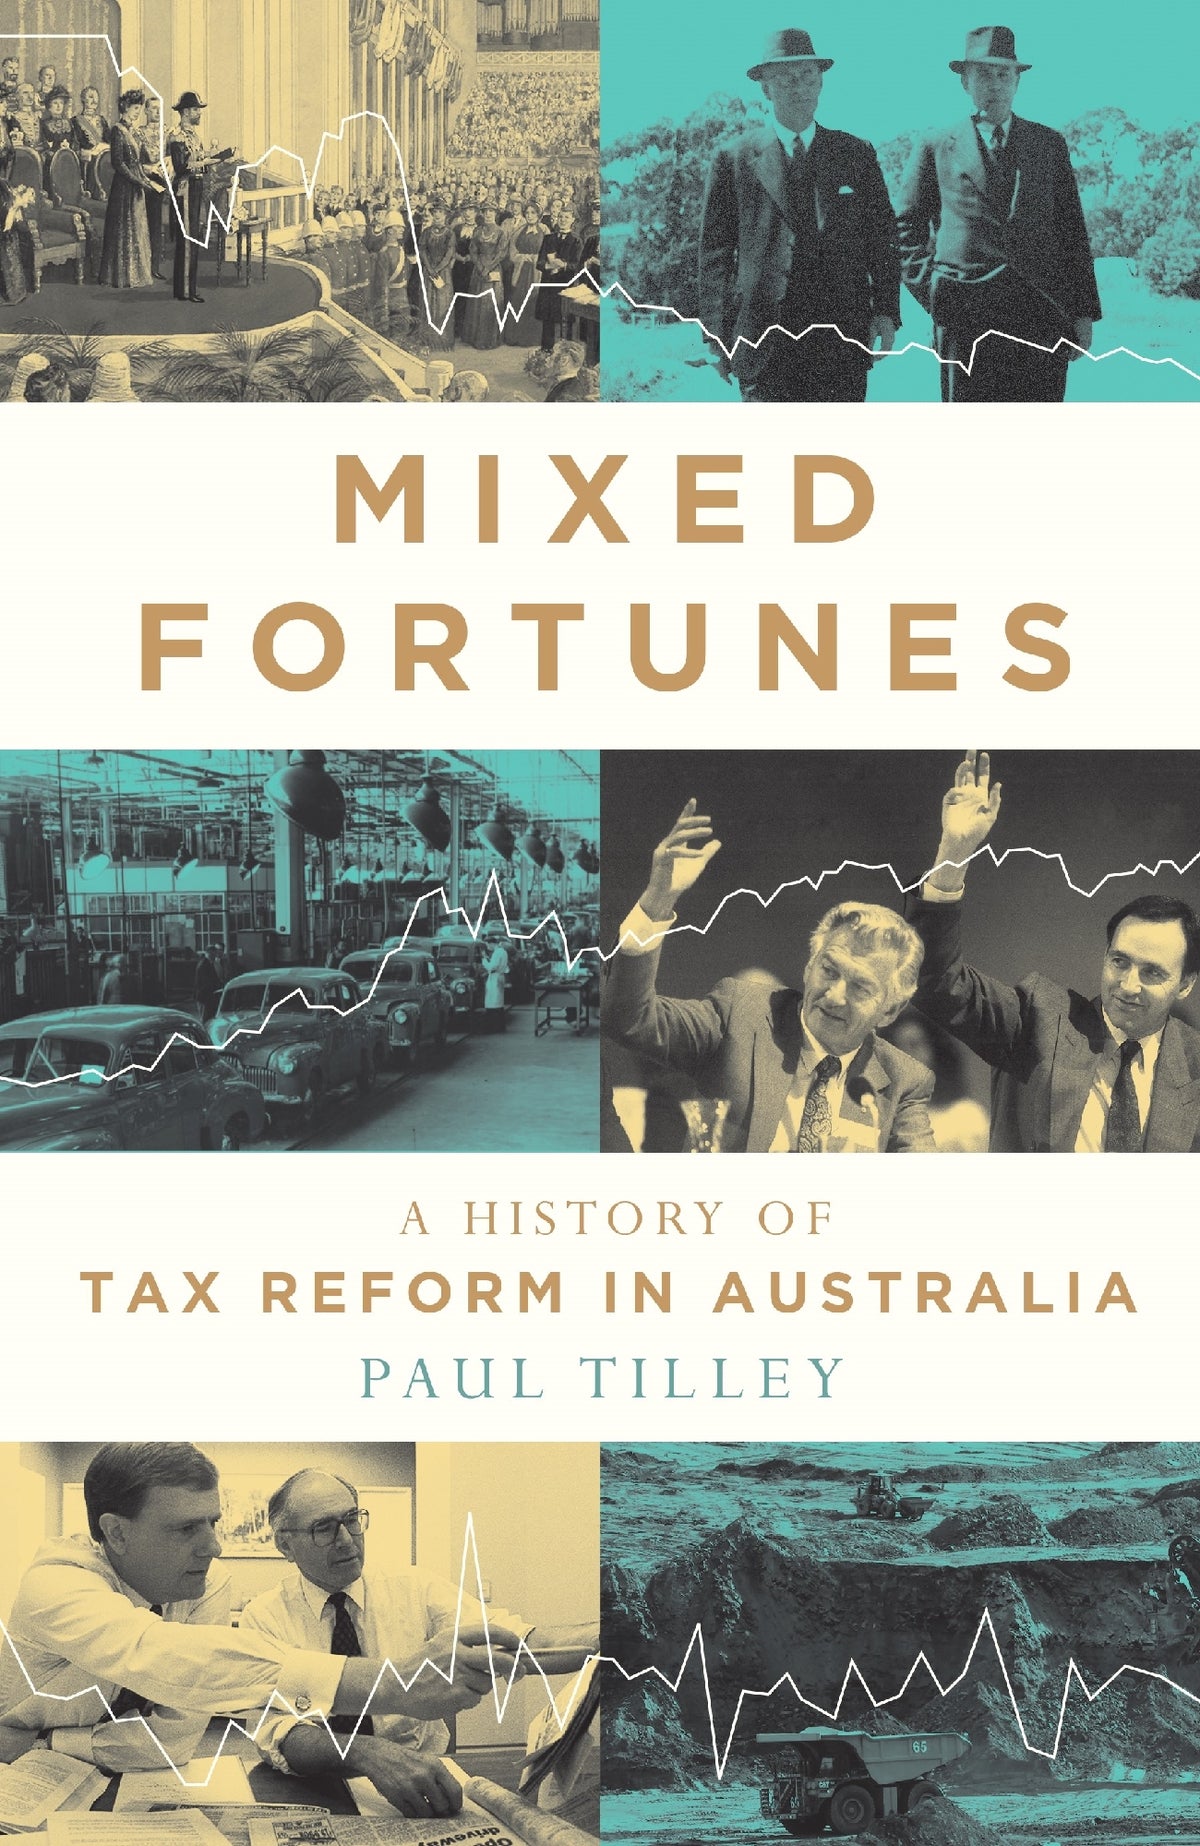 Mixed Fortunes: A History of Tax Reform in Australia